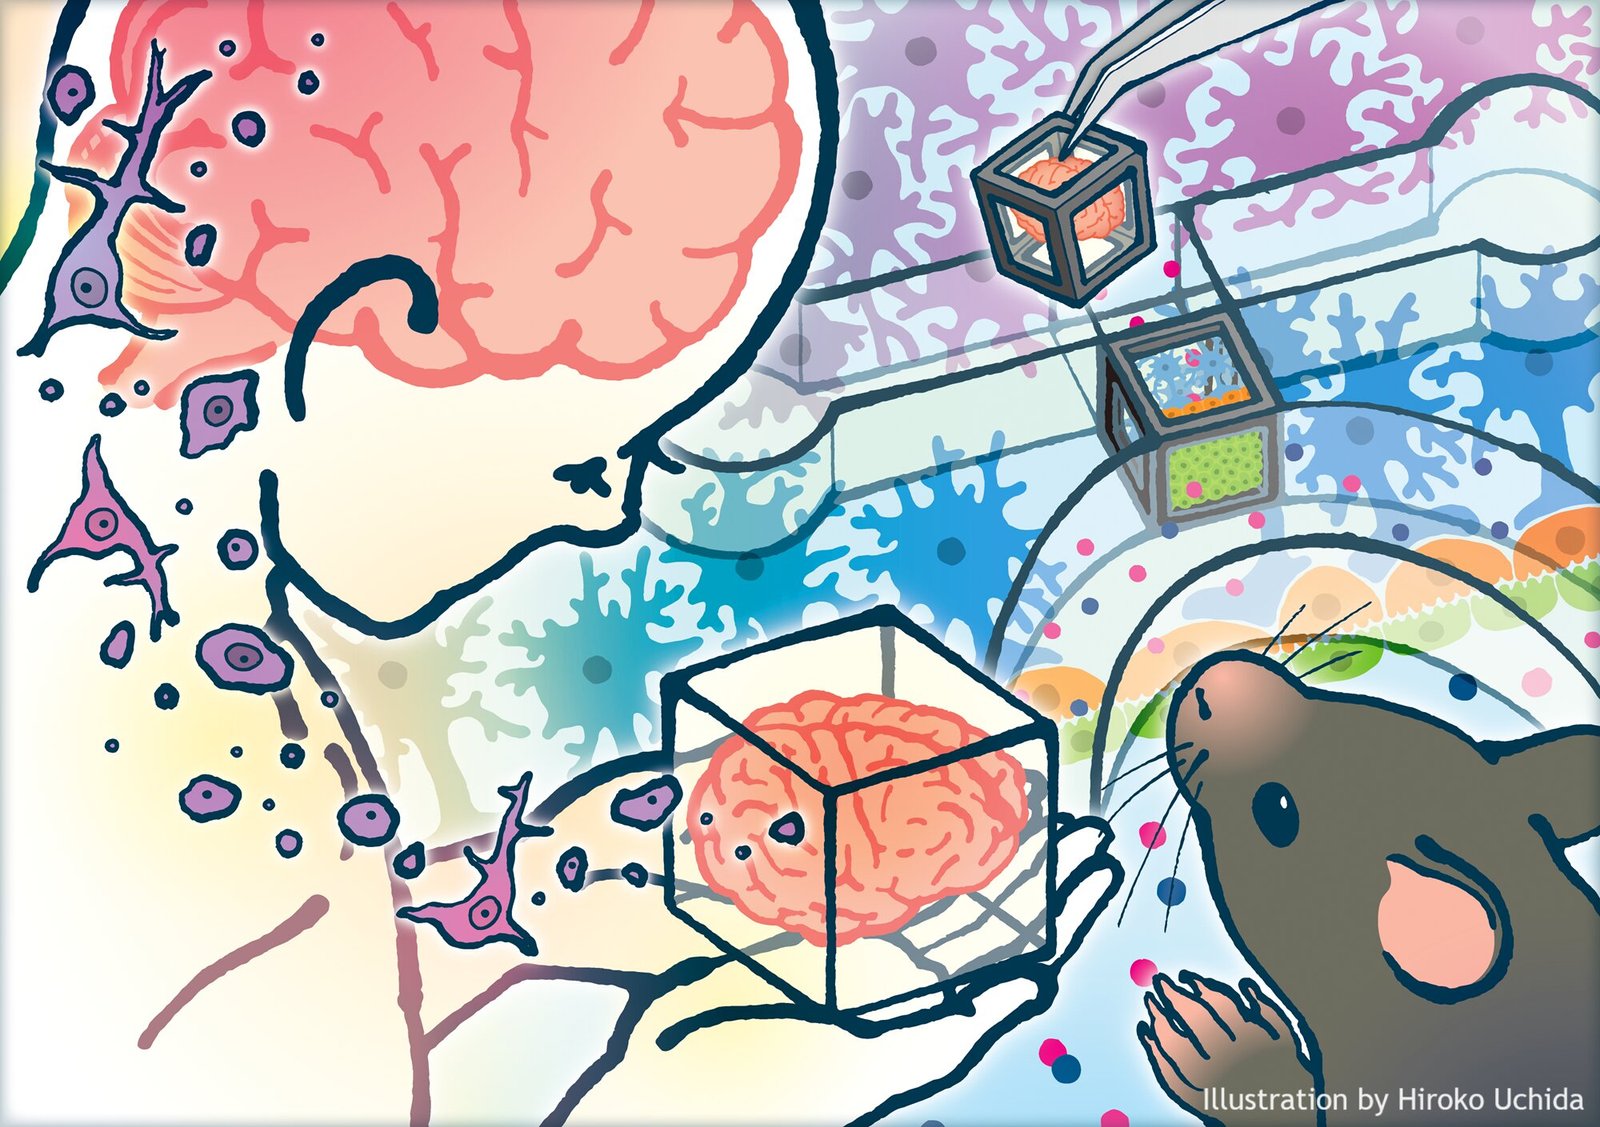 Researchers model blood brain barrier using Tissue in a CUBE system